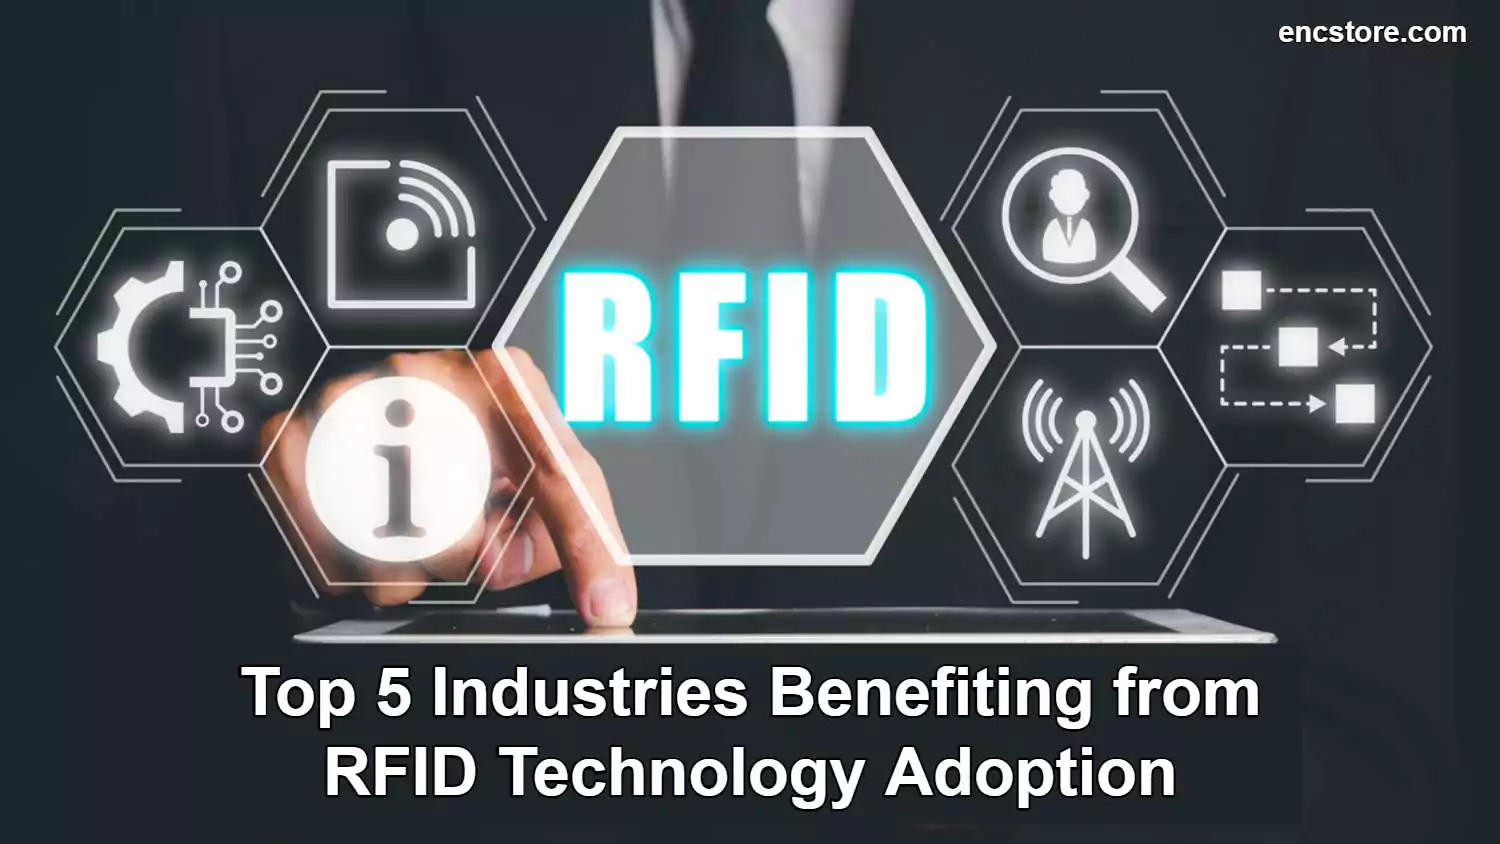 Top 5 Industries Benefiting from RFID Technology Adoption